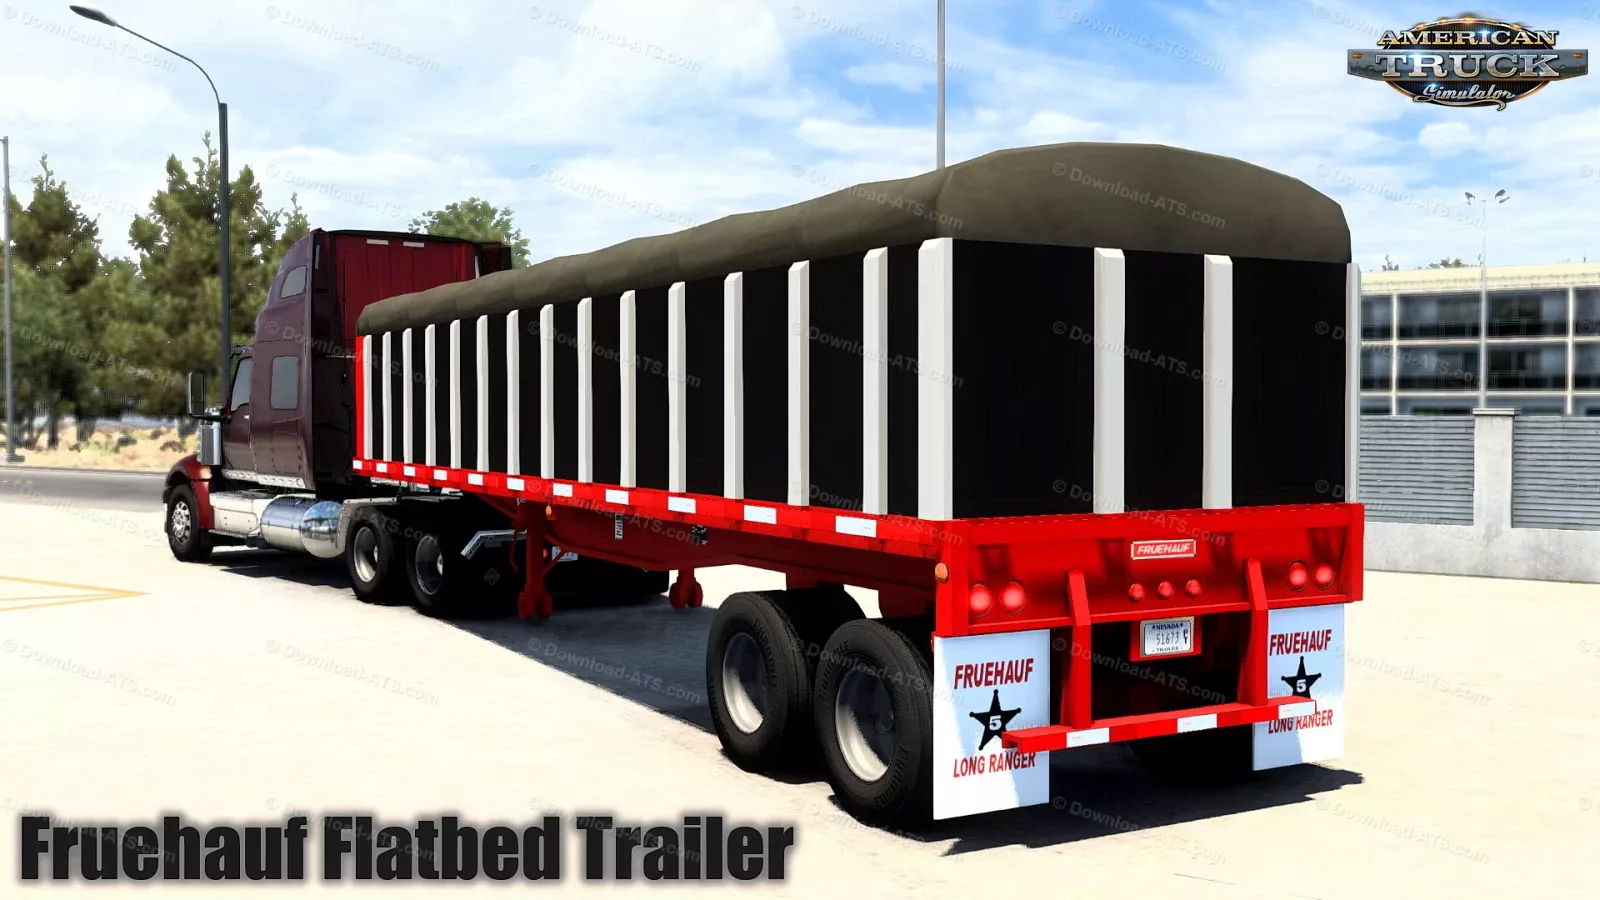 Fruehauf Flatbed Trailer Ownable v1.2 (1.50.x) for ATS